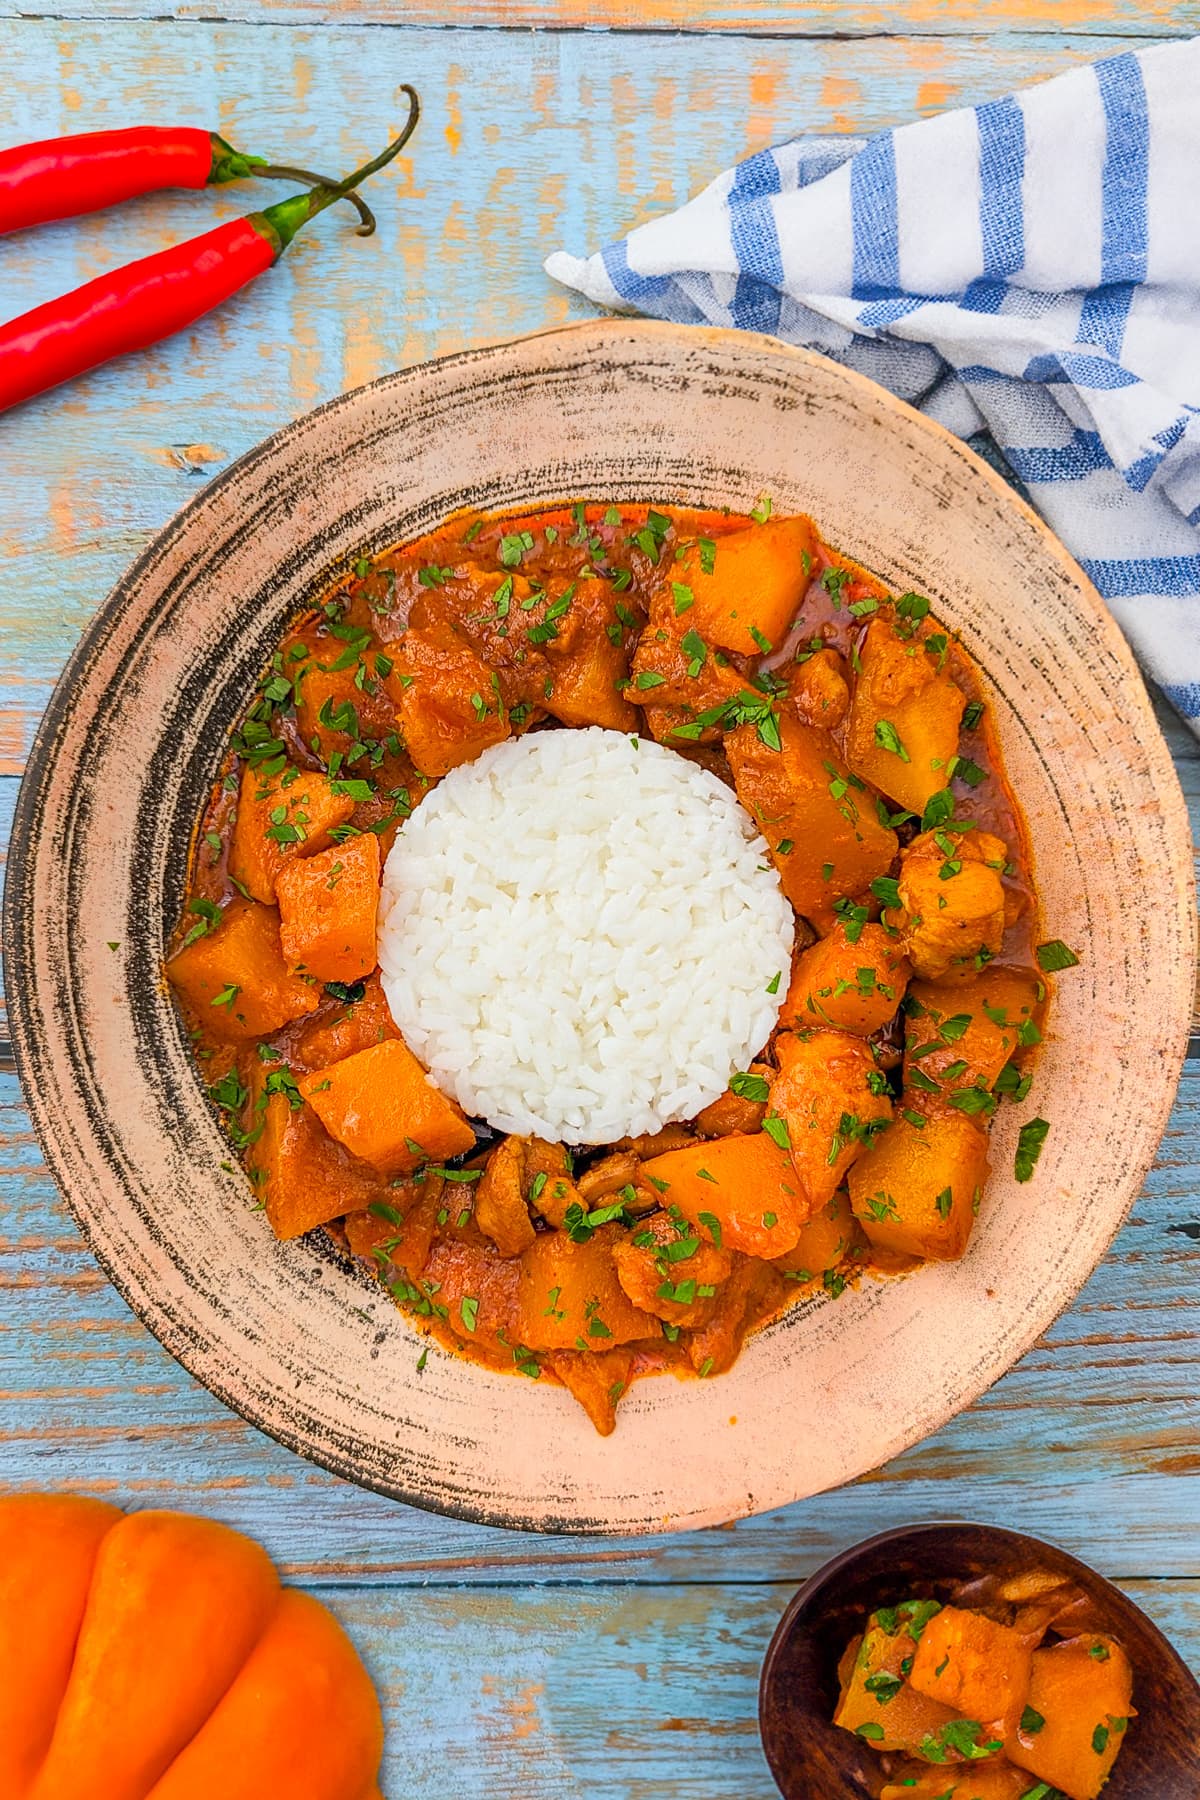 Pumpkin curry with rice and parsley in a vintage plate.